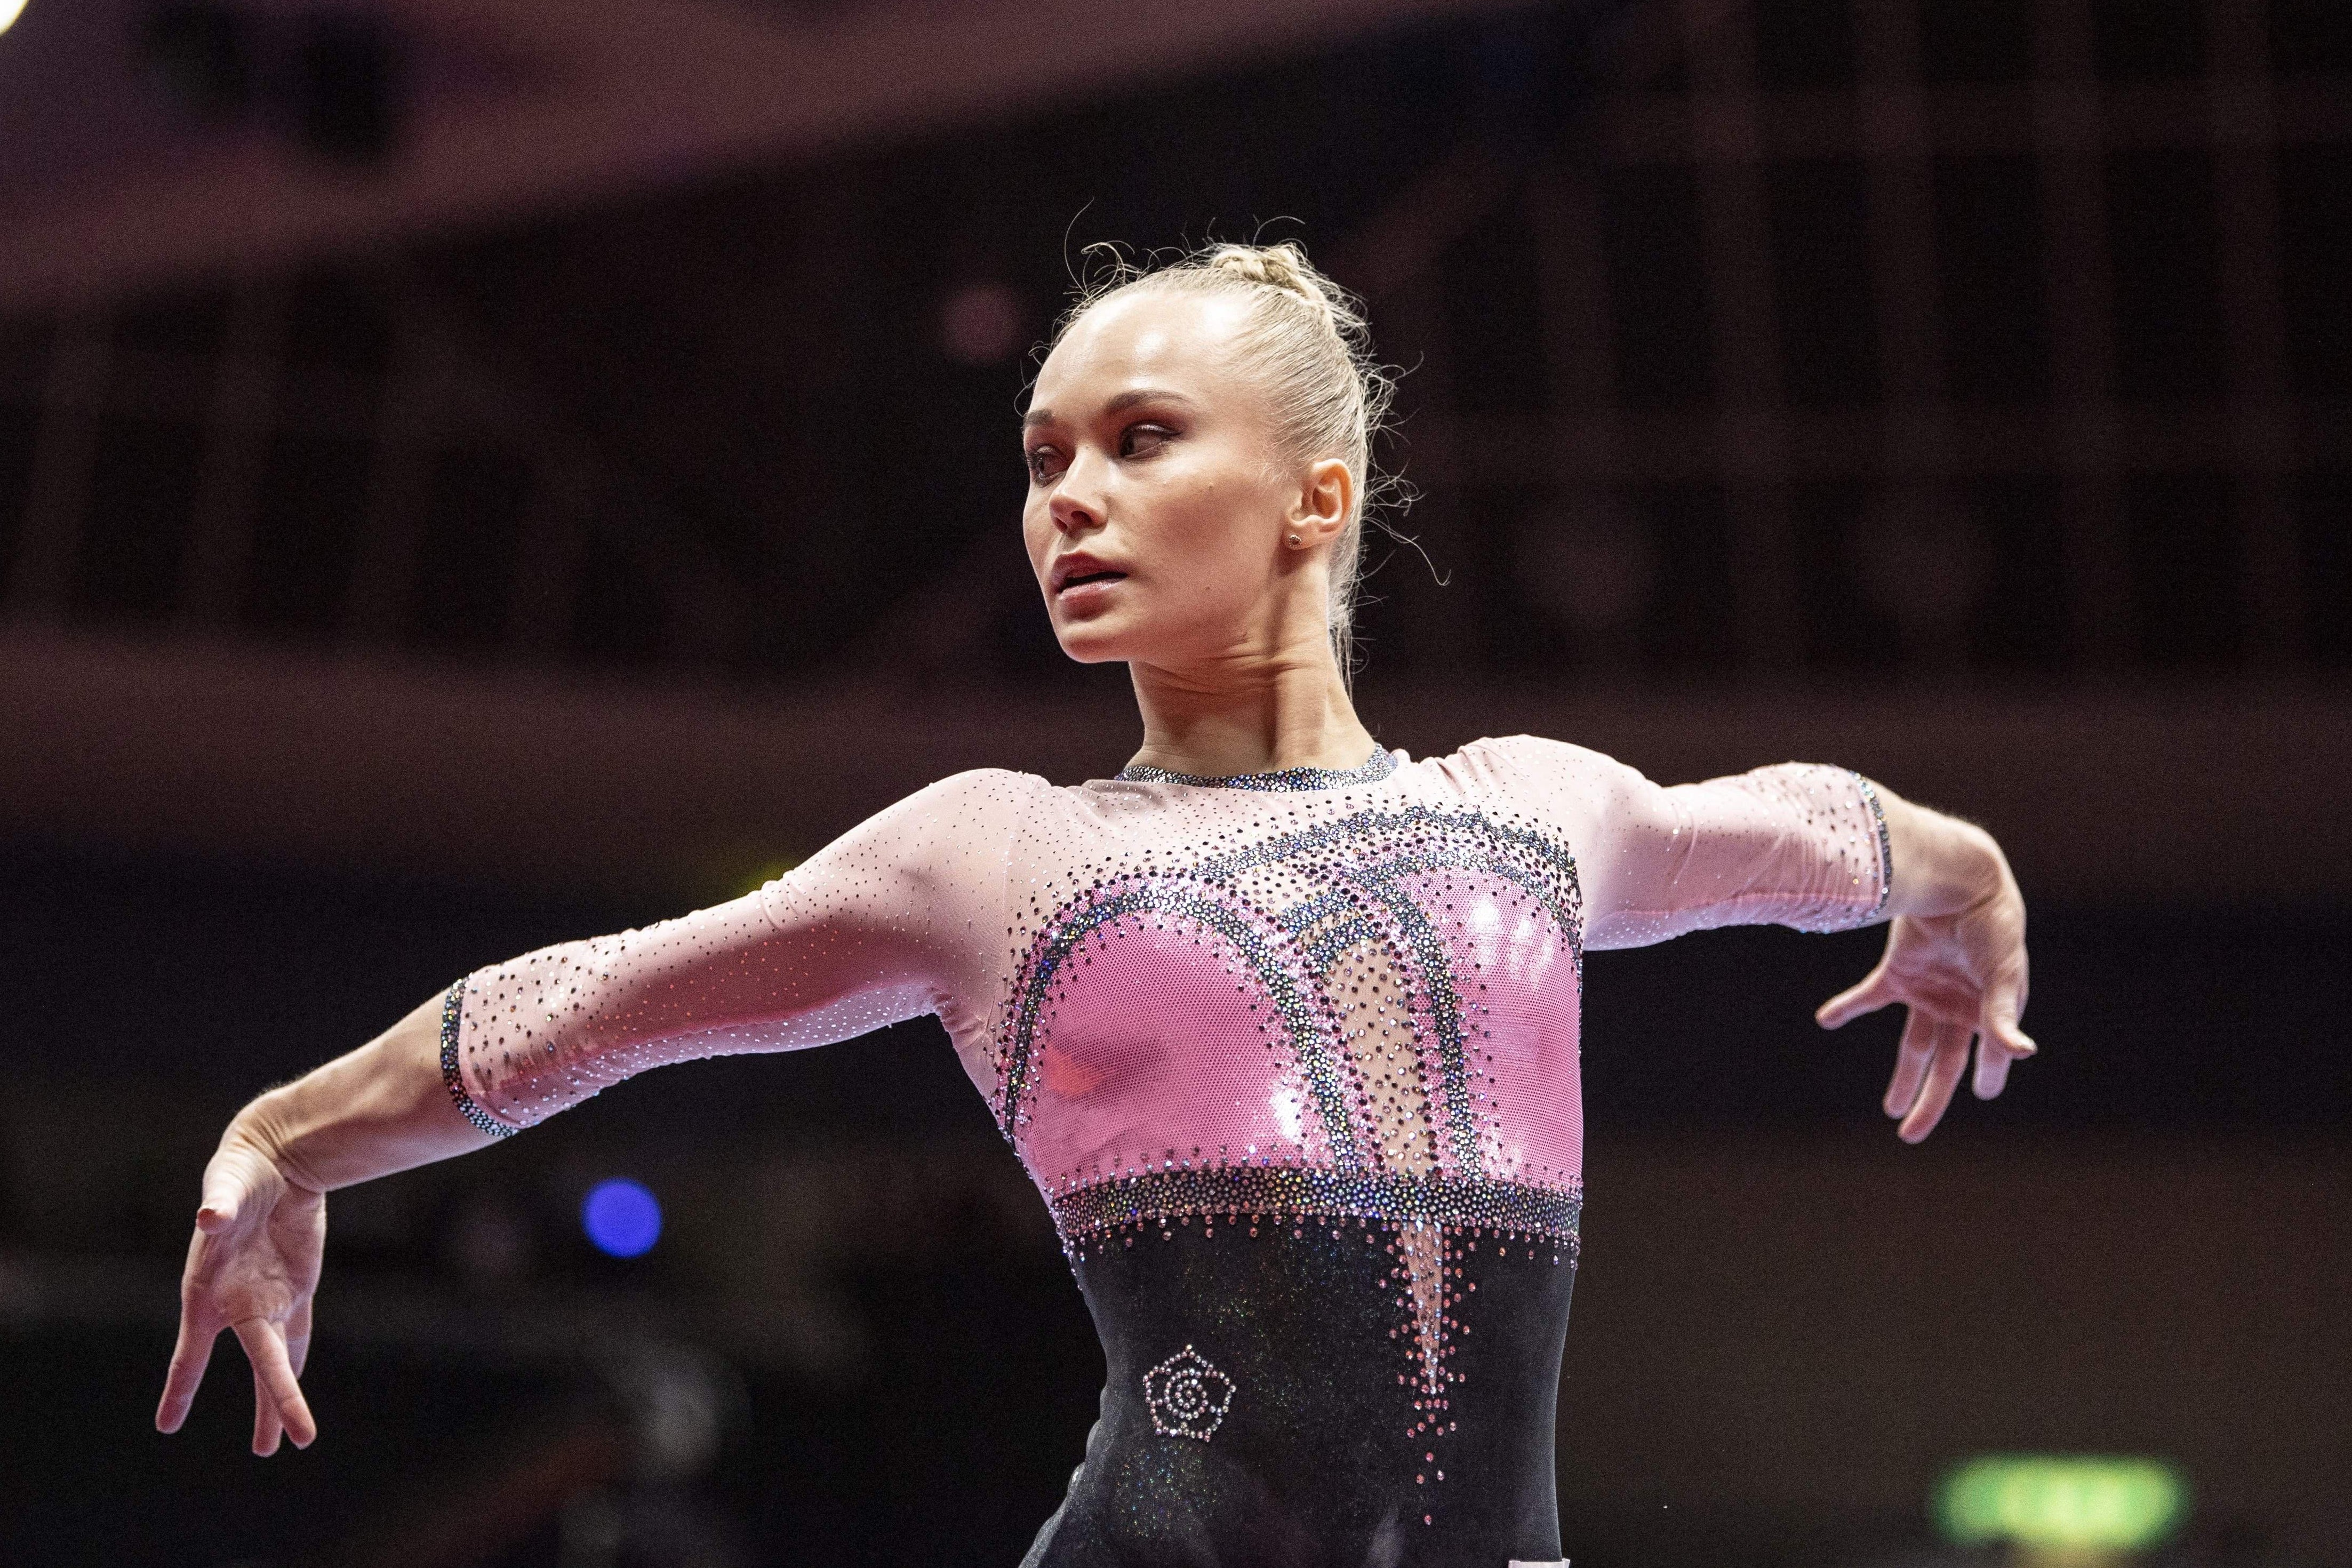 Melnikova in her leotard with her arms splayed outward and behind her, her head turned to her right